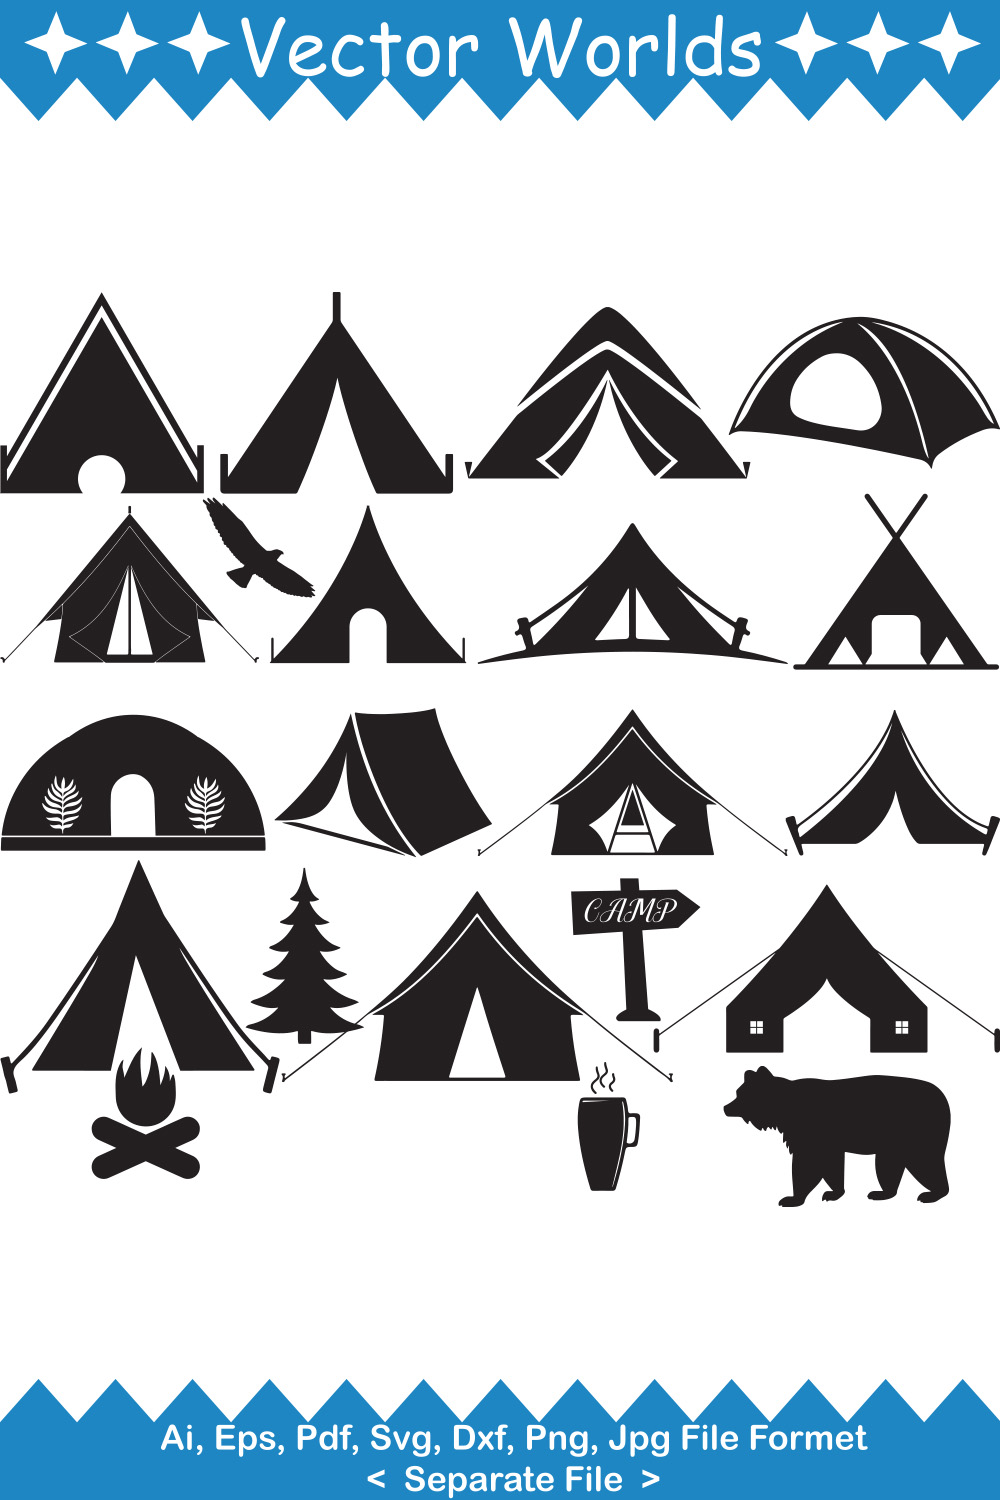 Collection of beautiful vector images of tent silhouettes.